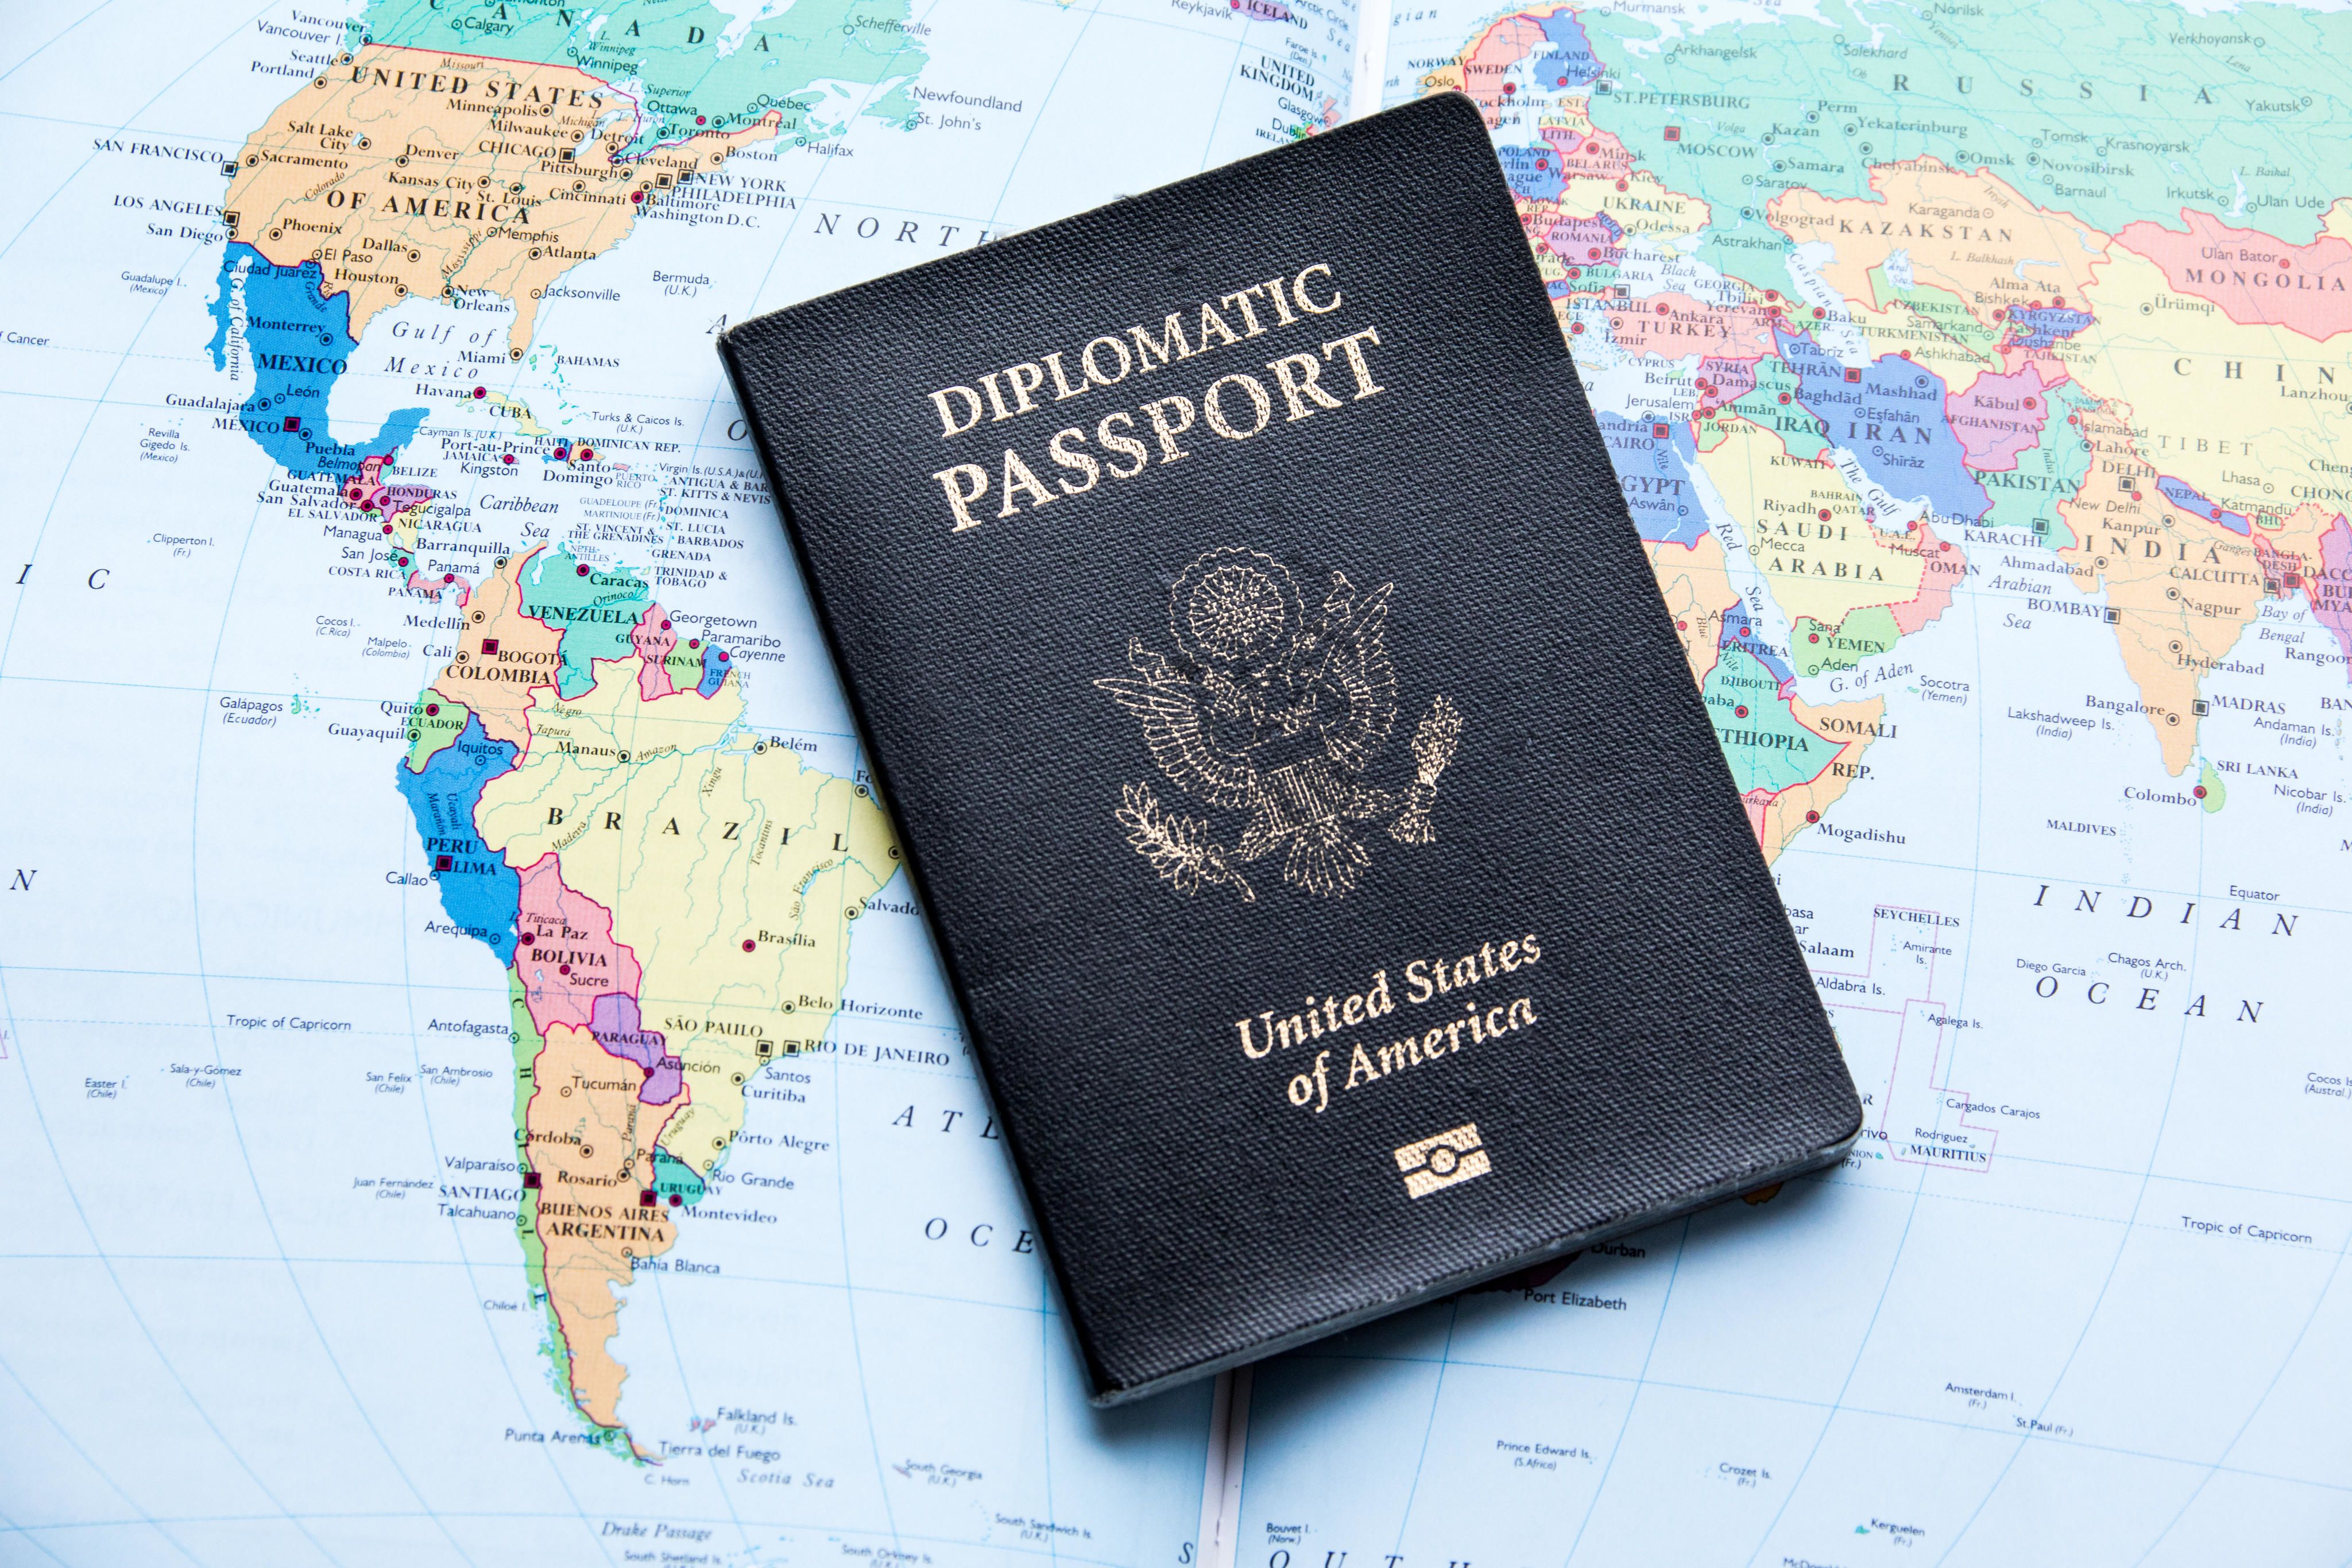 Diplomatic passports and other travel documents that open doors | CNN